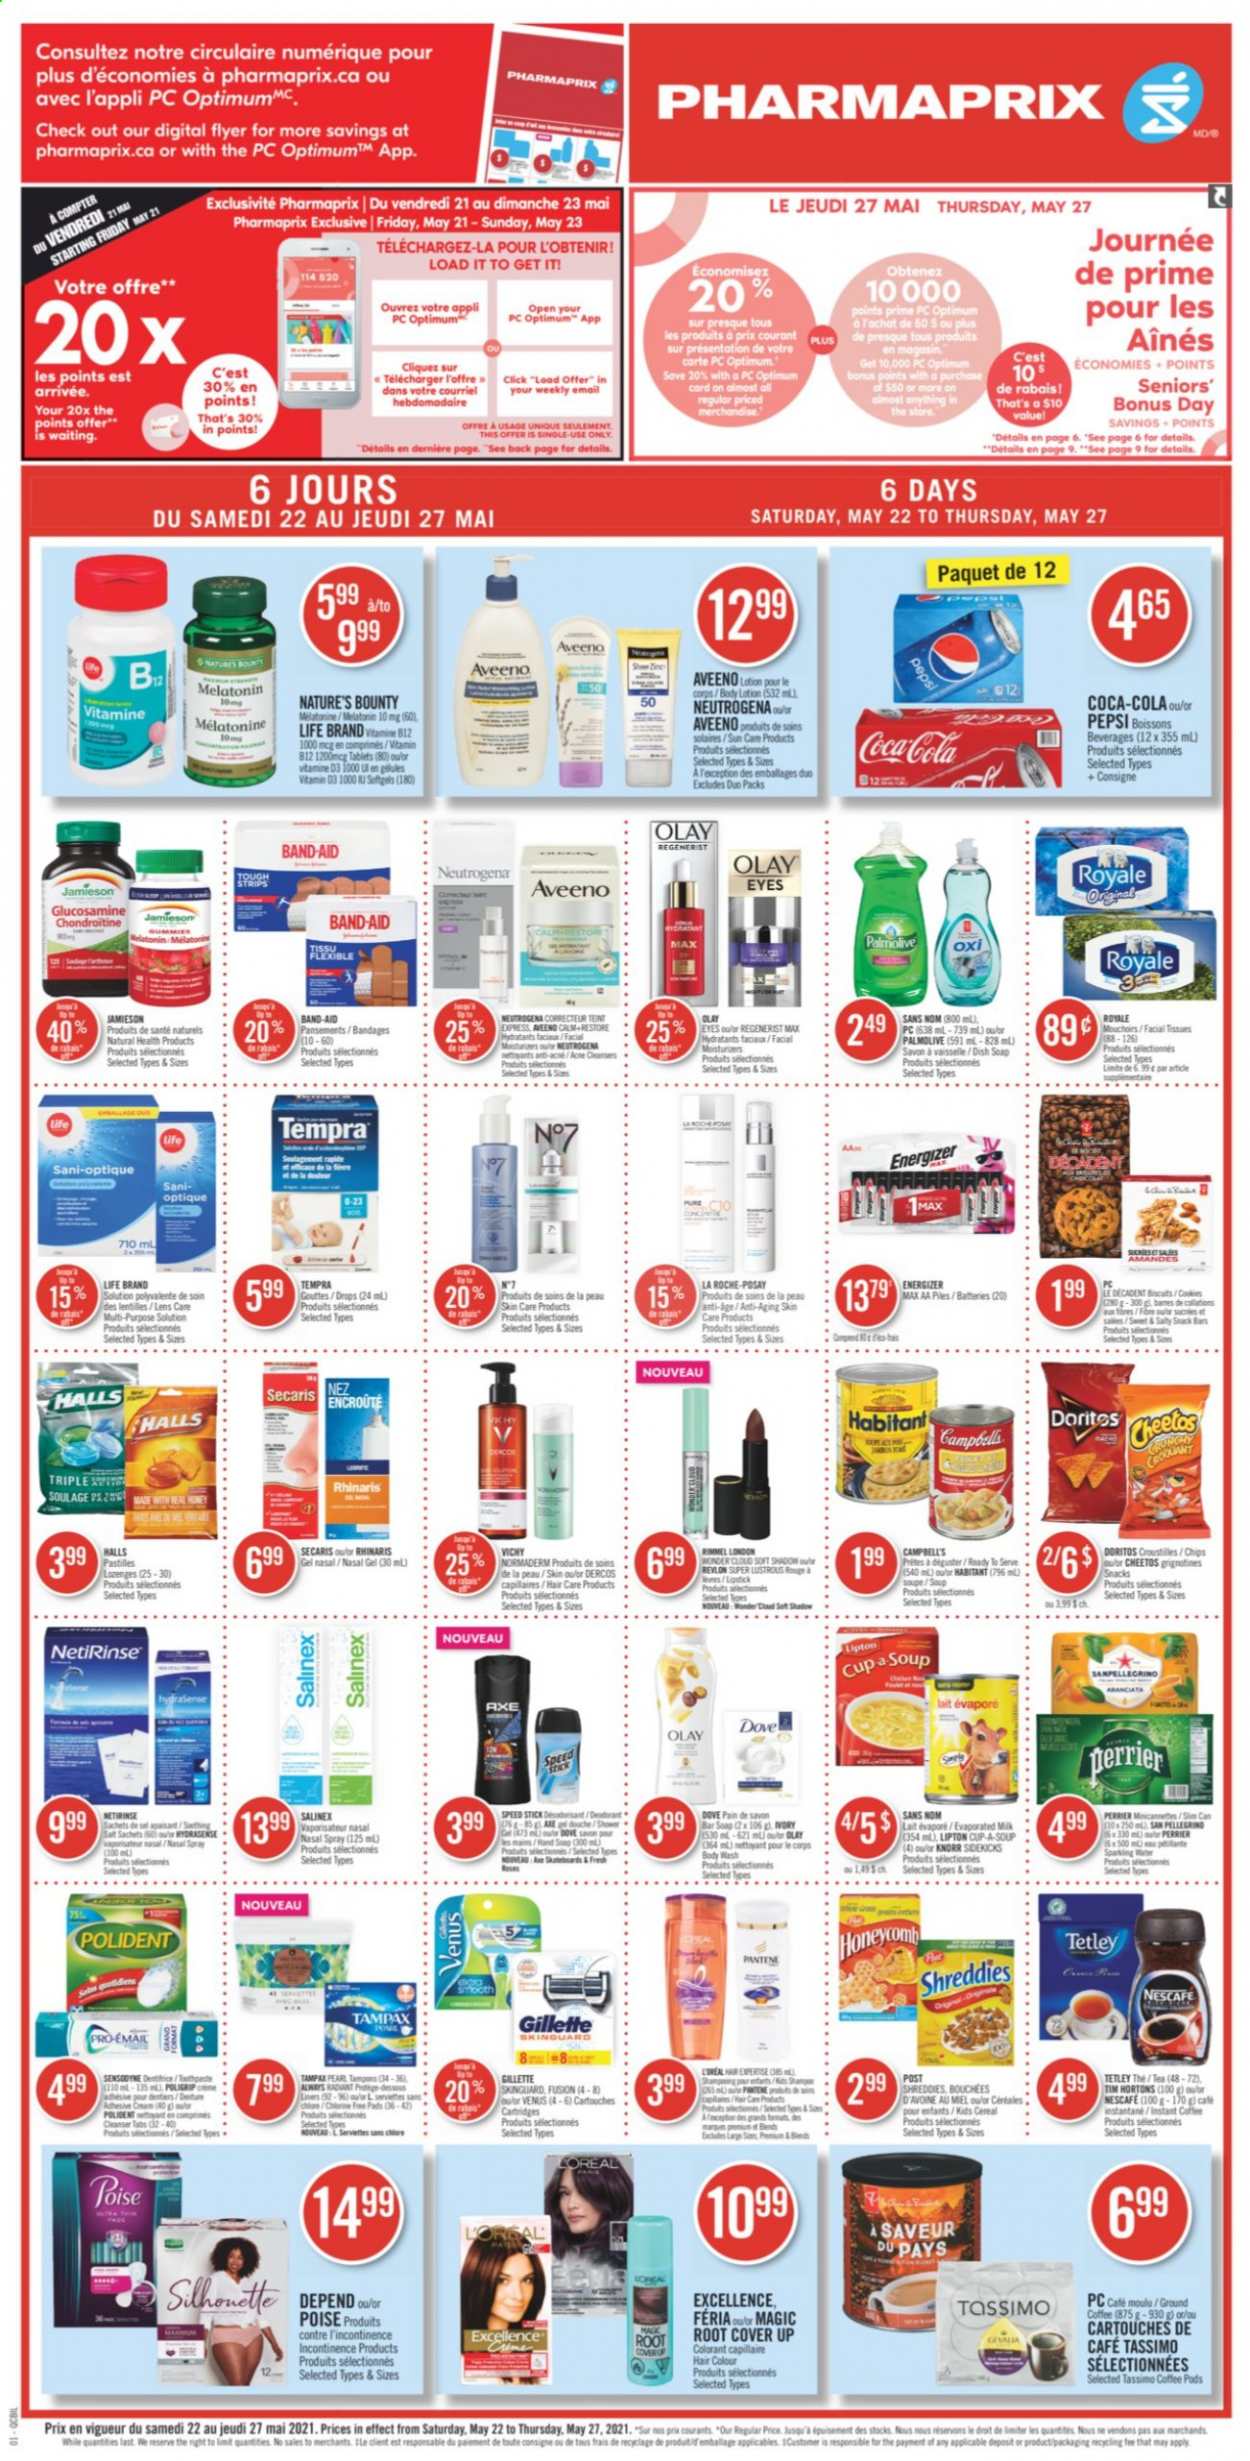 thumbnail - Pharmaprix Flyer - May 22, 2021 - May 27, 2021 - Sales products - Campbell's, soup, strips, Halls, snack, pastilles, snack bar, Doritos, Cheetos, cereals, Coca-Cola, Pepsi, Perrier, sparkling water, San Pellegrino, tea, coffee pods, instant coffee, ground coffee, Aveeno, tissues, body wash, Vichy, hand soap, Palmolive, soap bar, soap, Polident, tampons, cleanser, facial tissues, La Roche-Posay, Olay, Revlon, hair color, body lotion, Speed Stick, Venus, lipstick, Rimmel, cup, battery, lens, glucosamine, Melatonin, Nature's Bounty, vitamin B12, nasal spray, Knorr, Gillette, Neutrogena, Tampax, Pantene, chips, Sensodyne, Nescafé. Page 1.